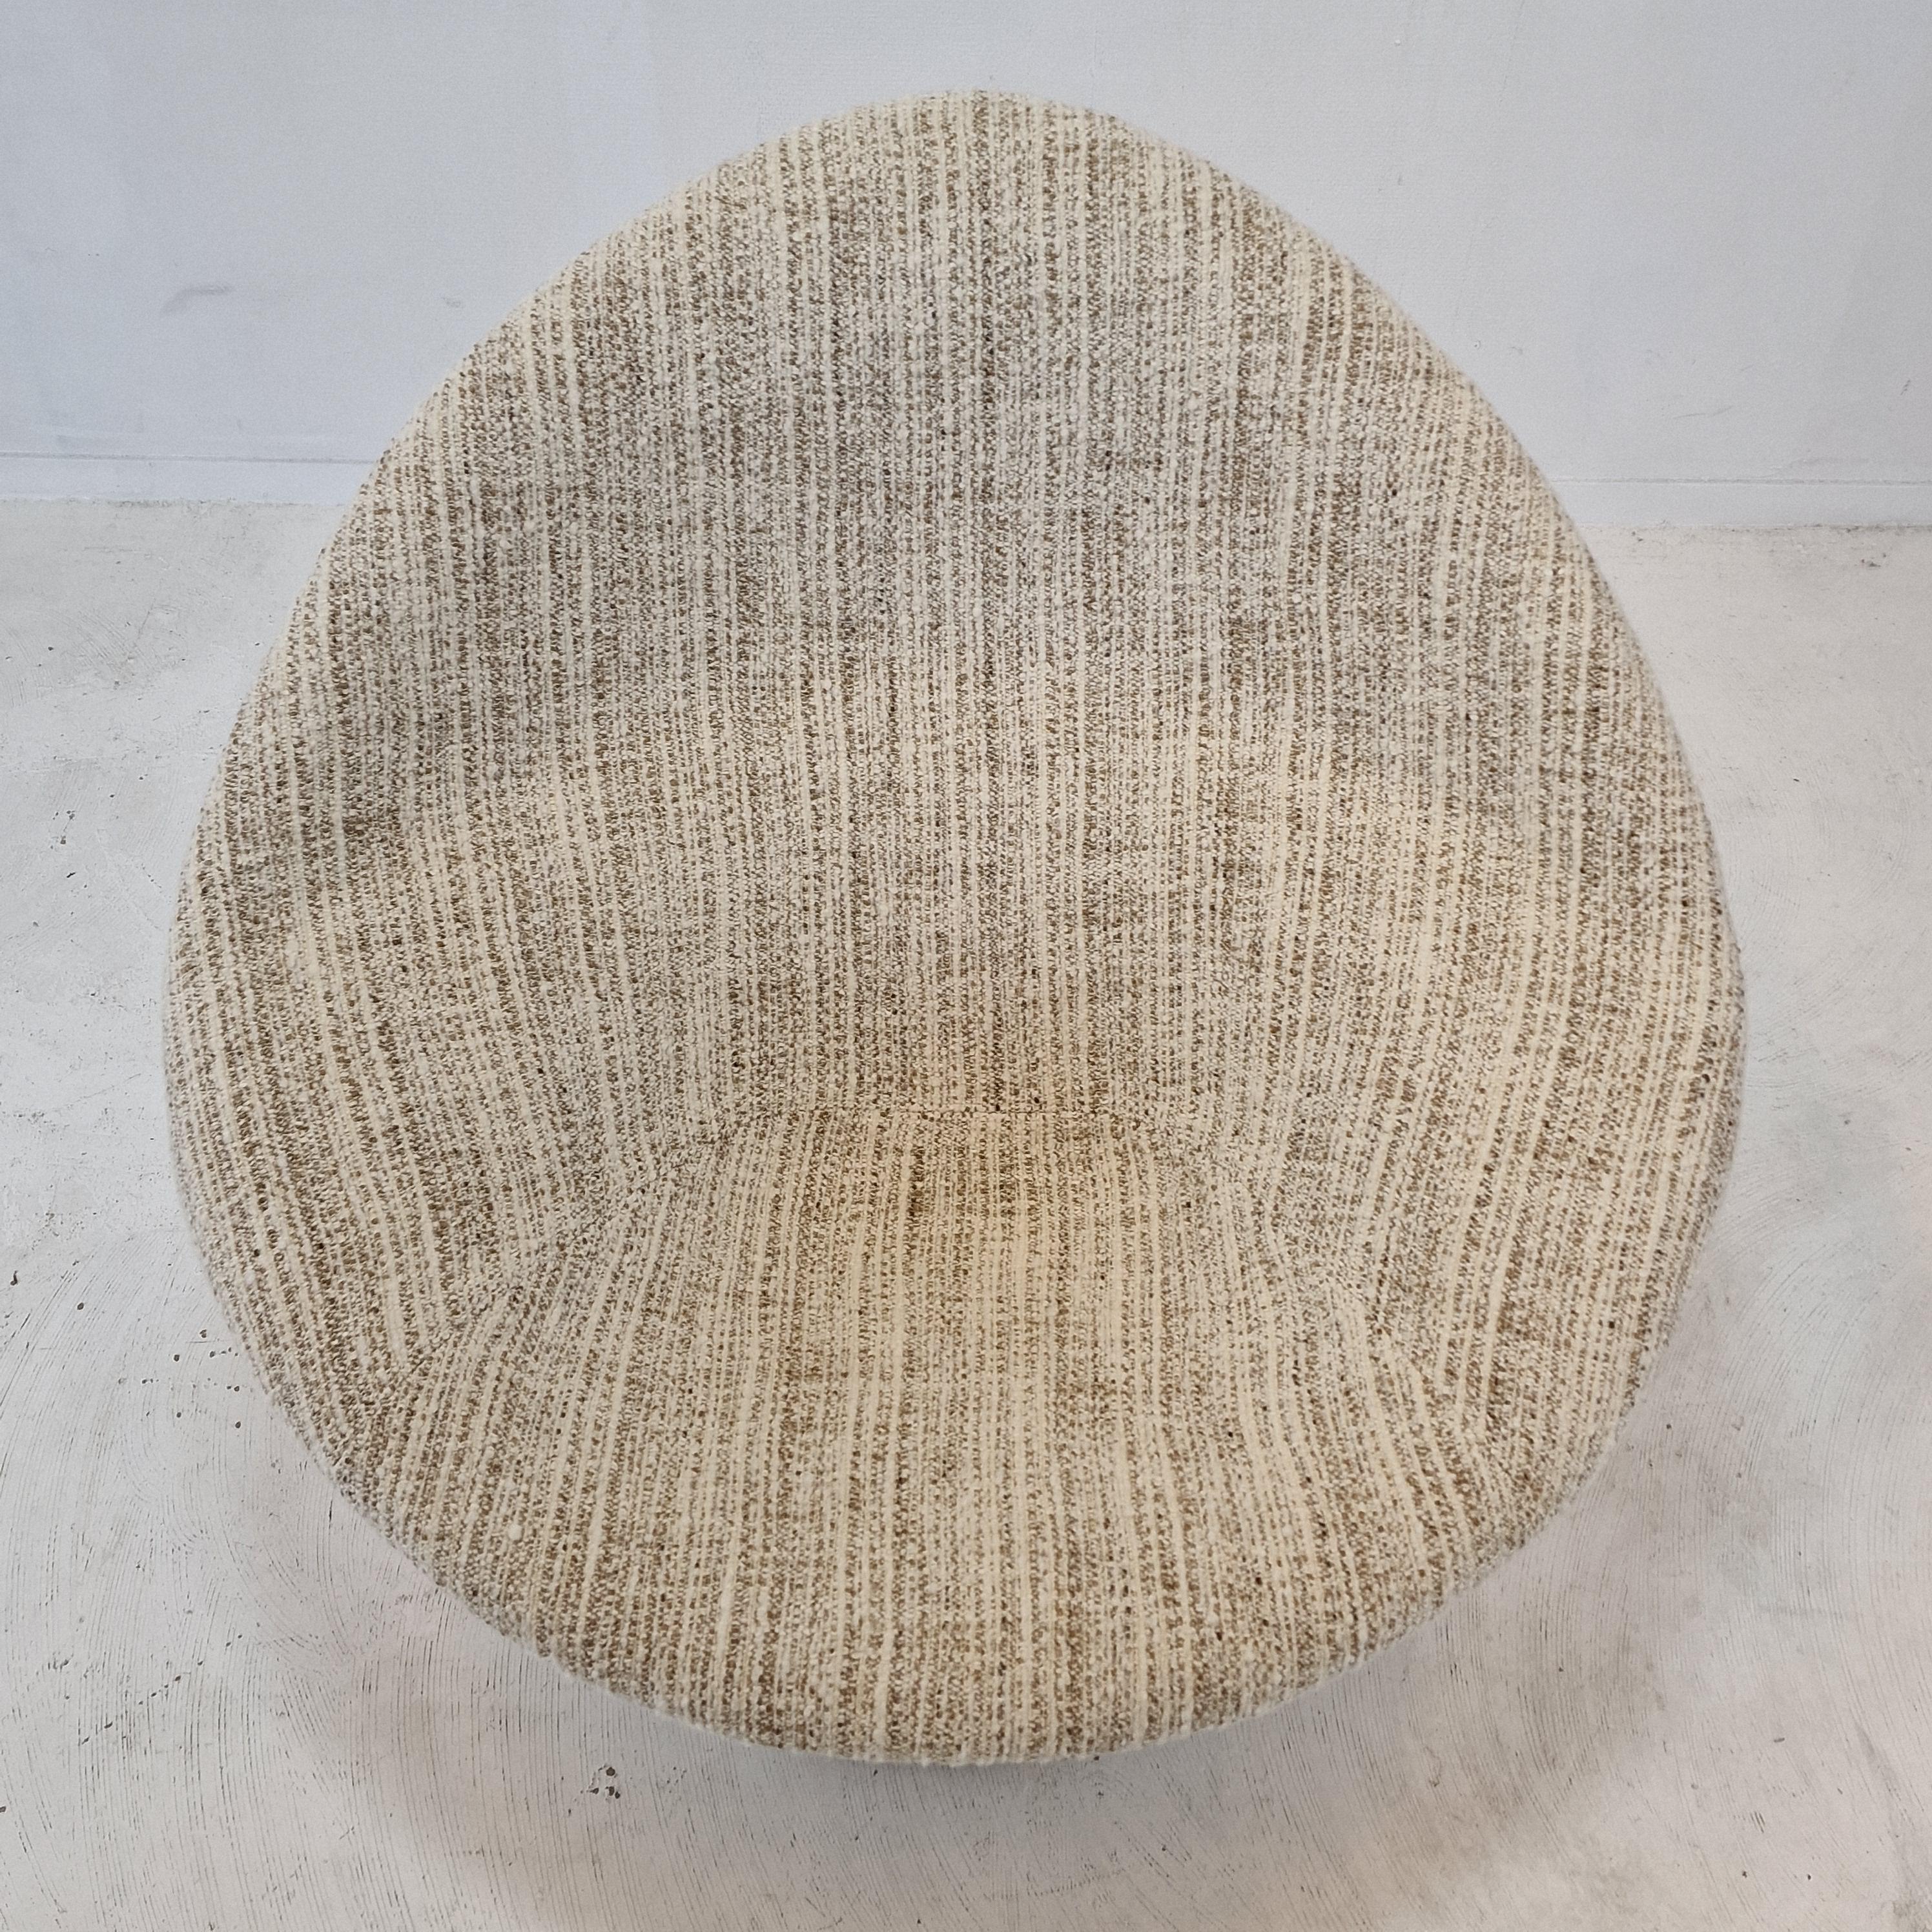 Midcentury Big Globe Armchair with Ottoman by Pierre Paulin for Artifort, 1970s For Sale 2